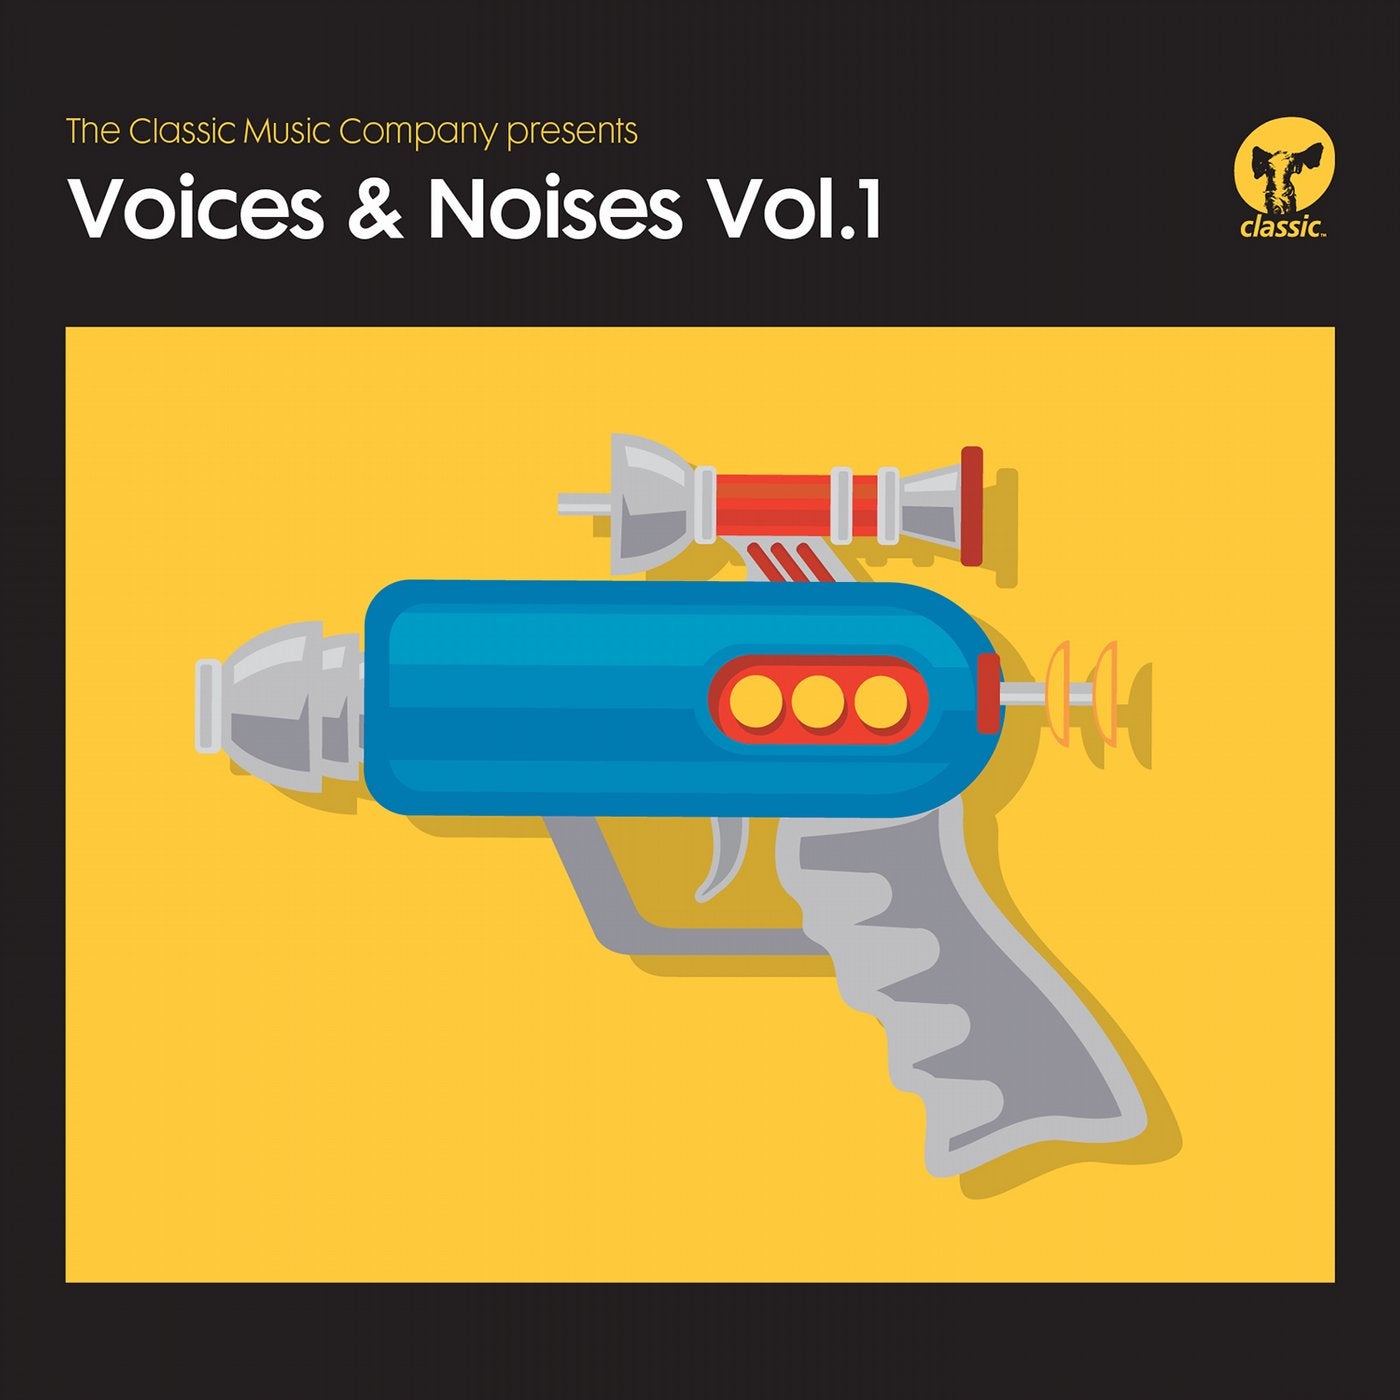 The Classic Music Company presents Voices & Noises Volume 1